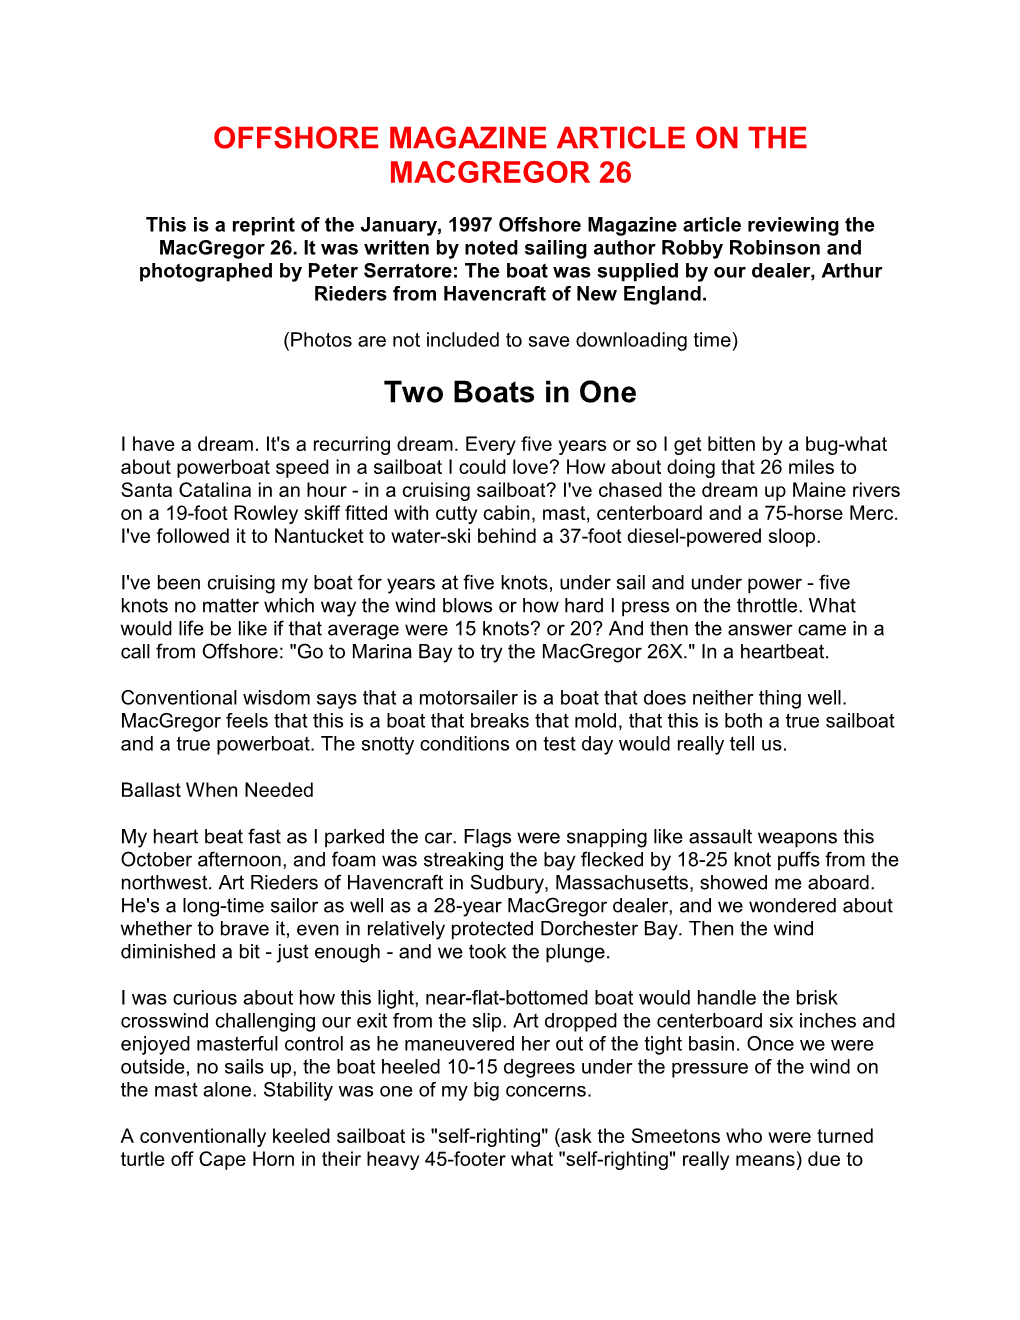 OFFSHORE MAGAZINE ARTICLE on the MACGREGOR 26 Two Boats